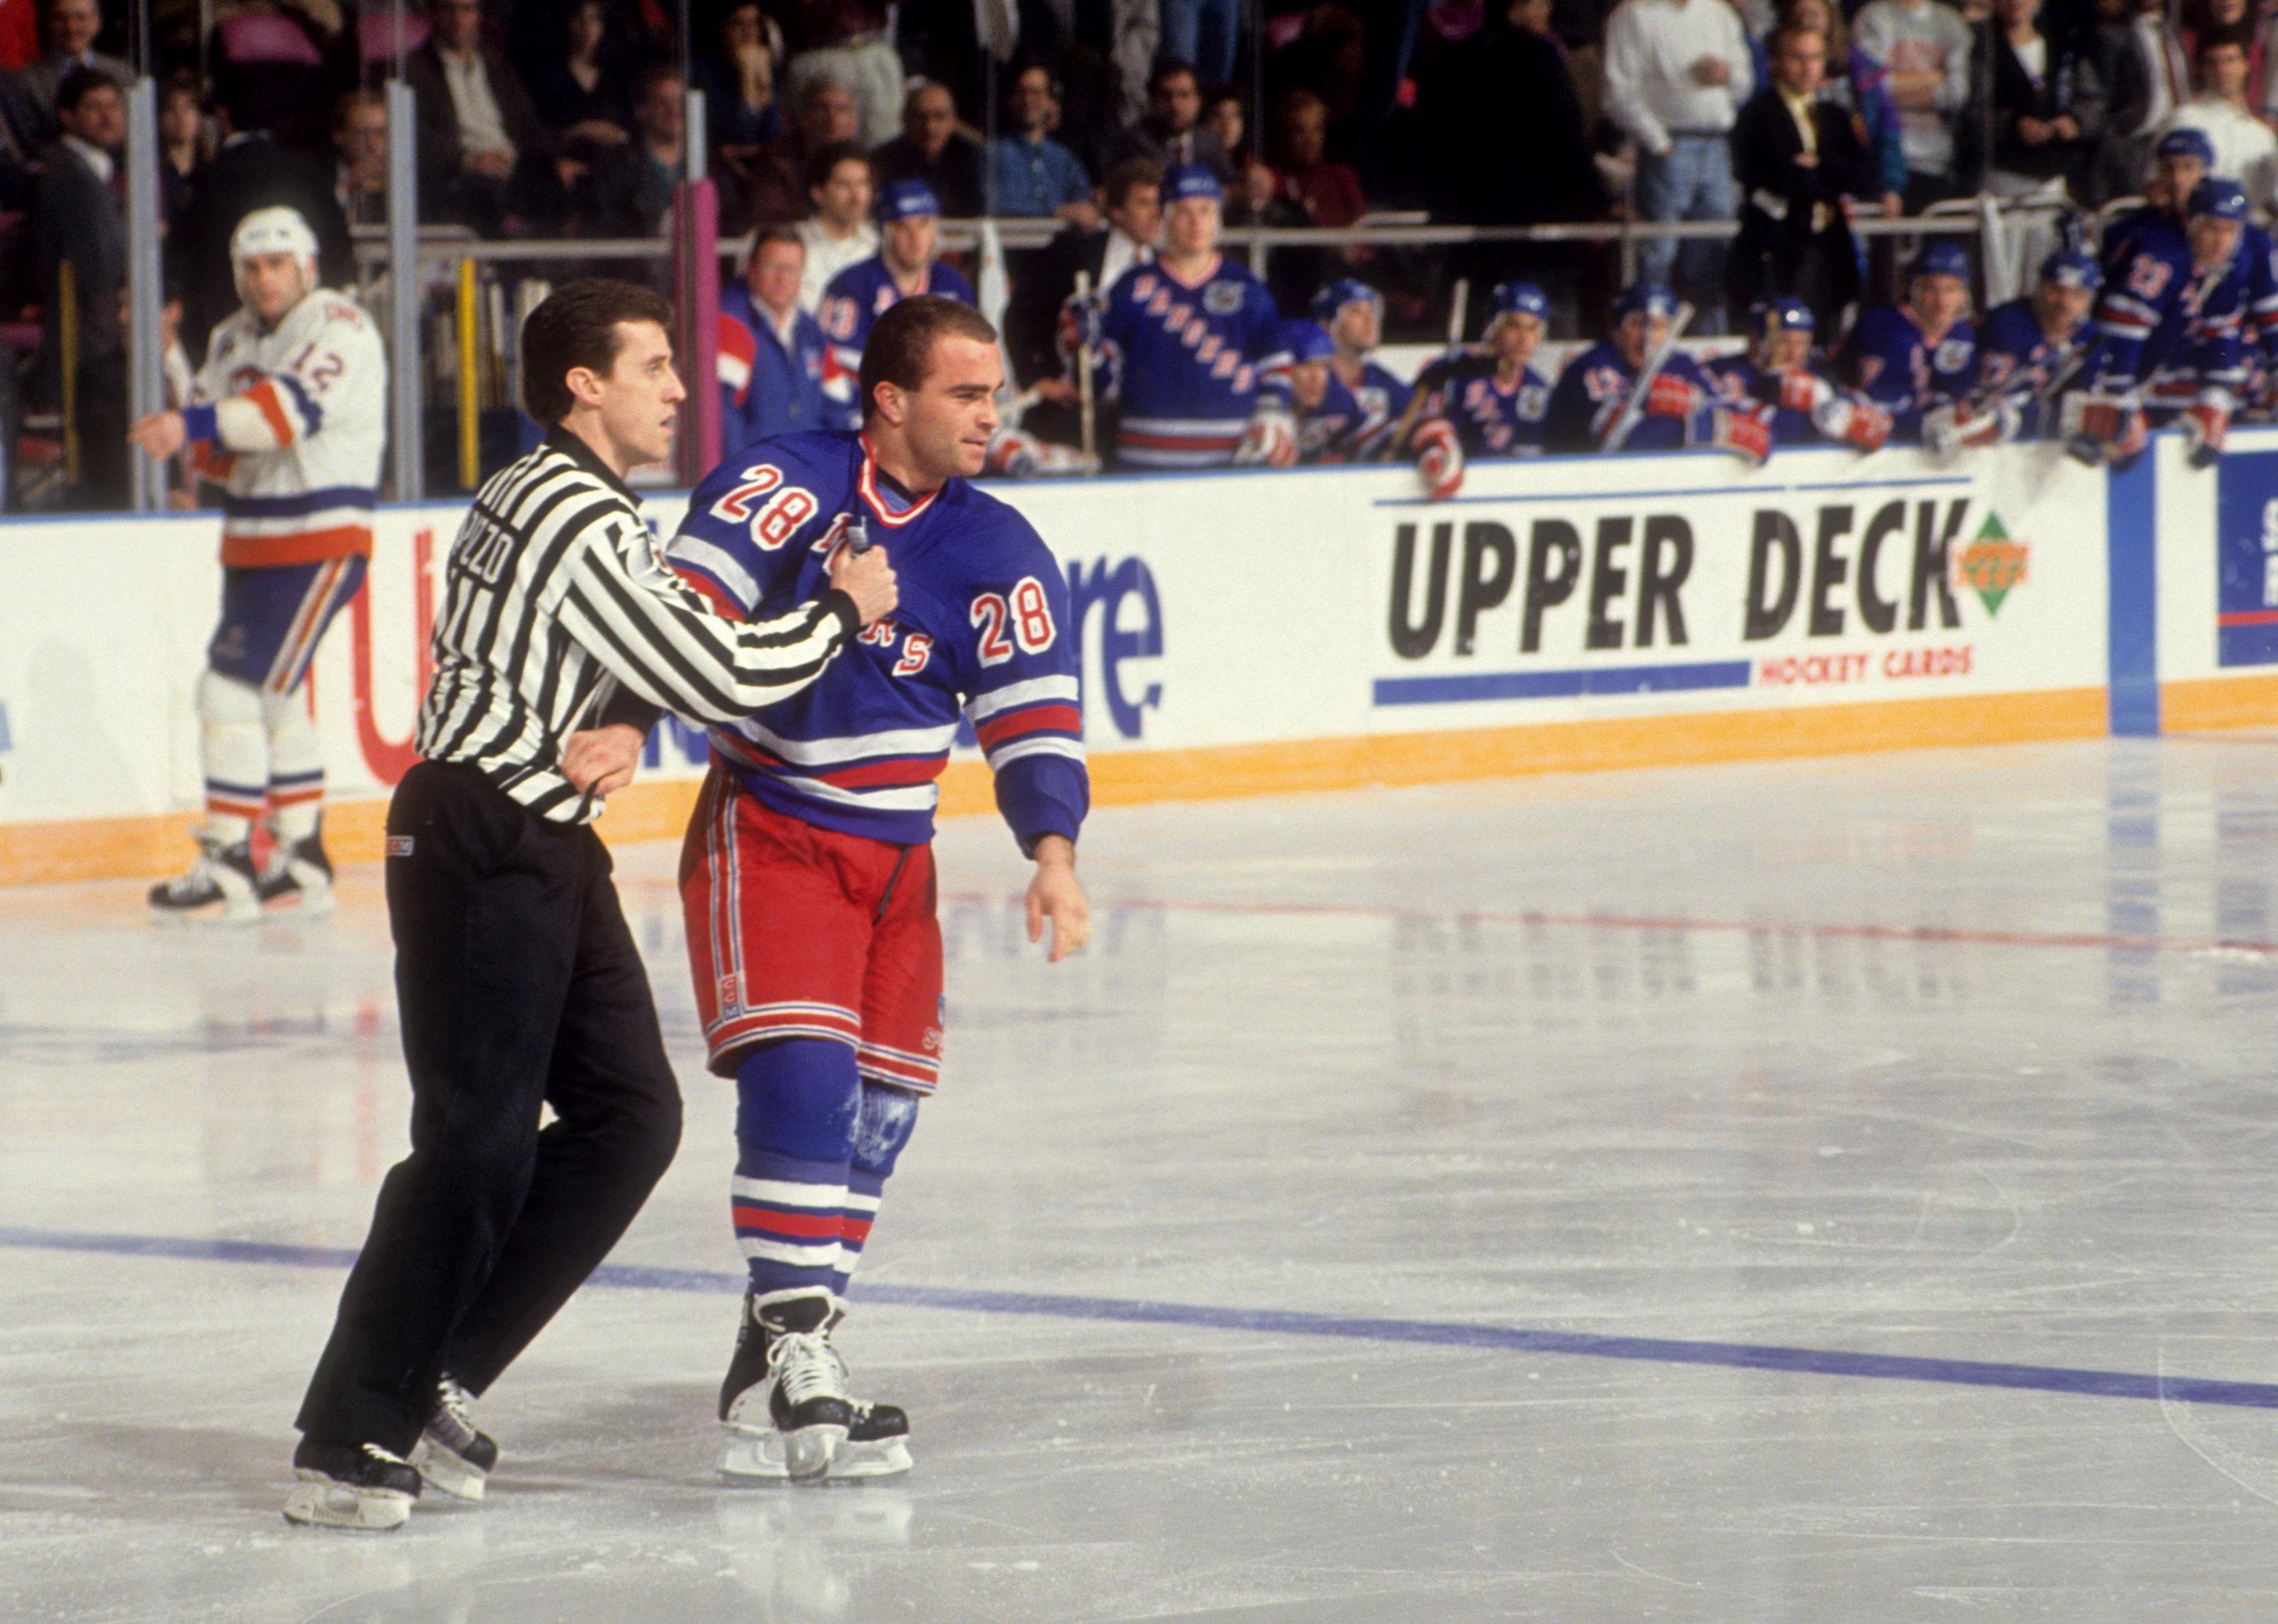 Tie Domi is held by a linesman after fighting during a game.